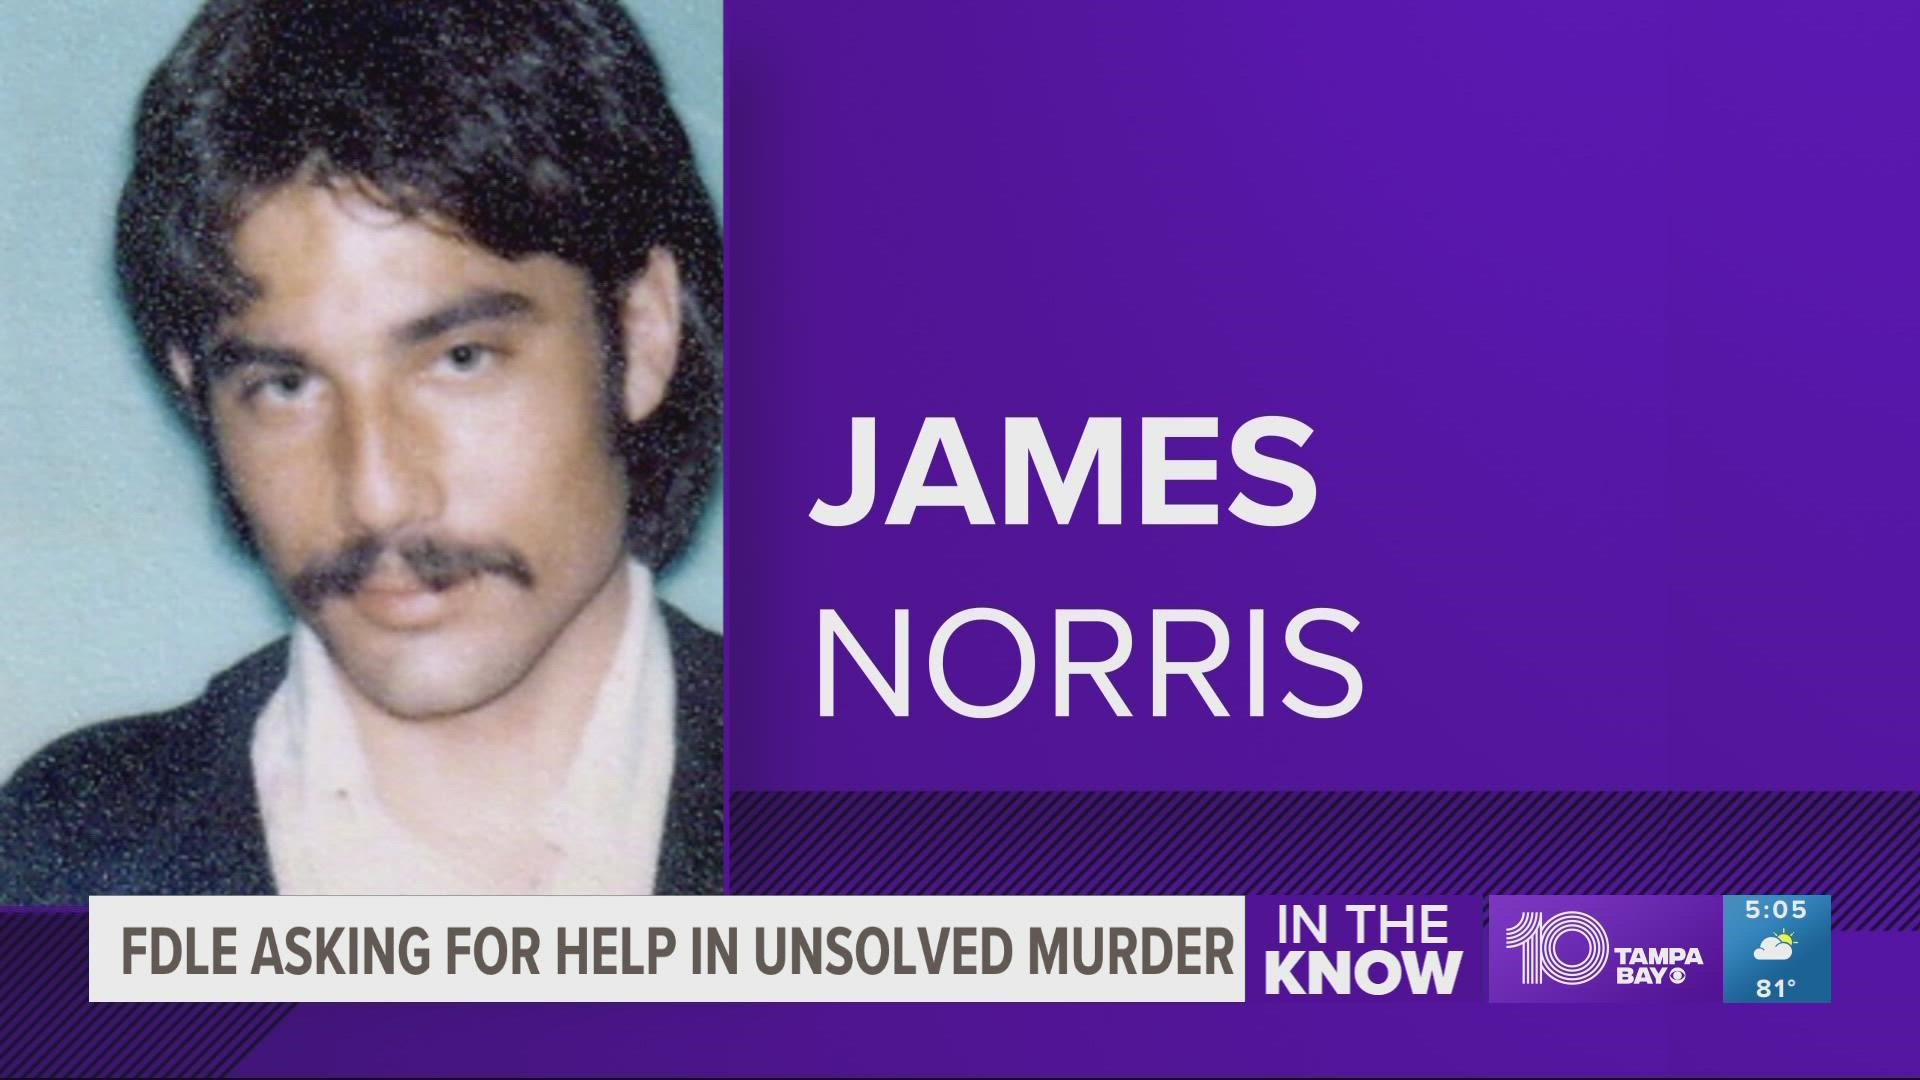 The murder of James Norris is believed to be one of the oldest active homicide cases in Florida.